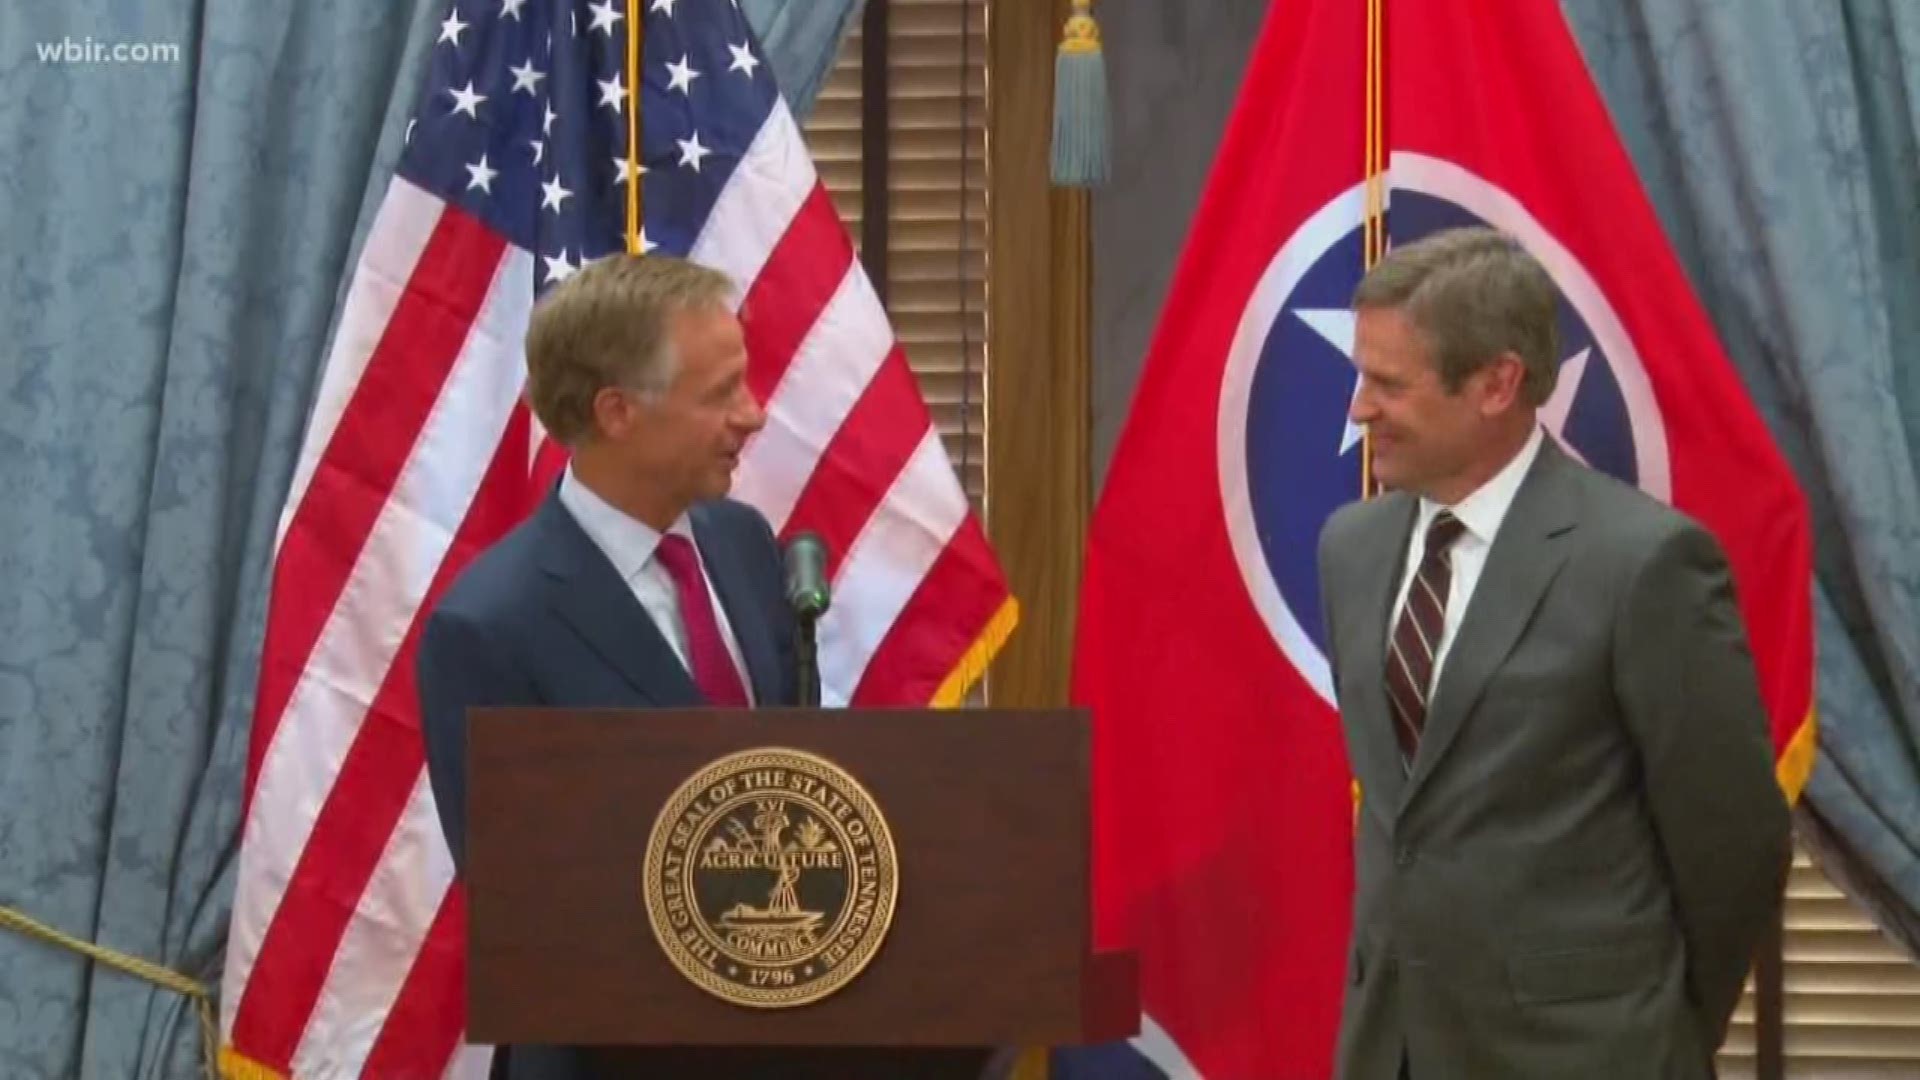 Gov. Bill Haslam welcomed future gov. Bill Lee to the State Capitol on Wednesday. The two men vowed to work together to ensure a smooth transition.